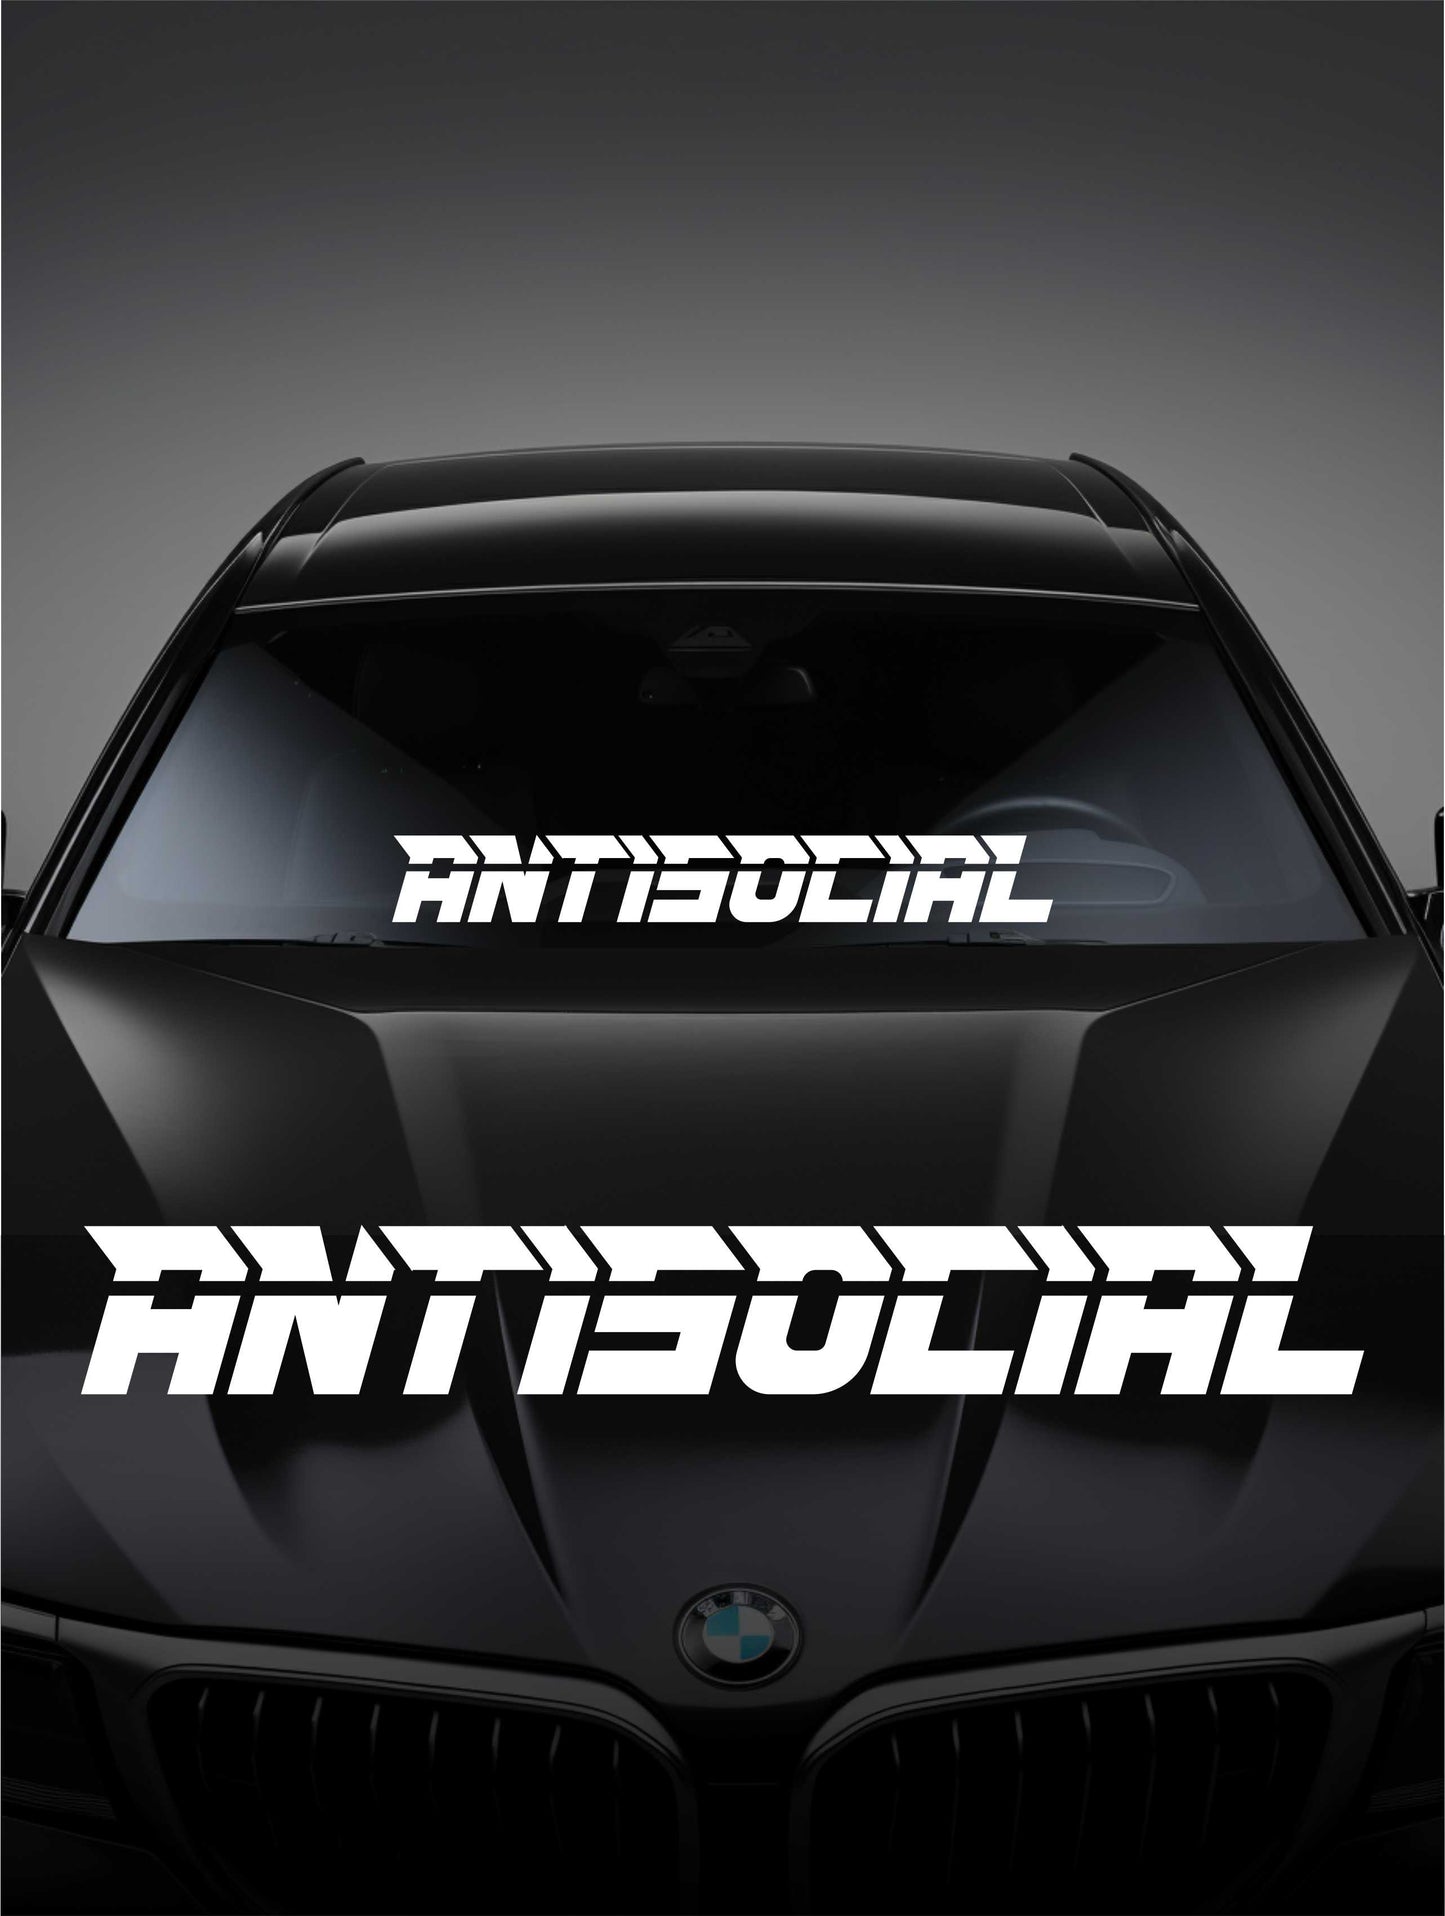 ''Antisocial No.2'' - Plotted Vinyl Banner Decal